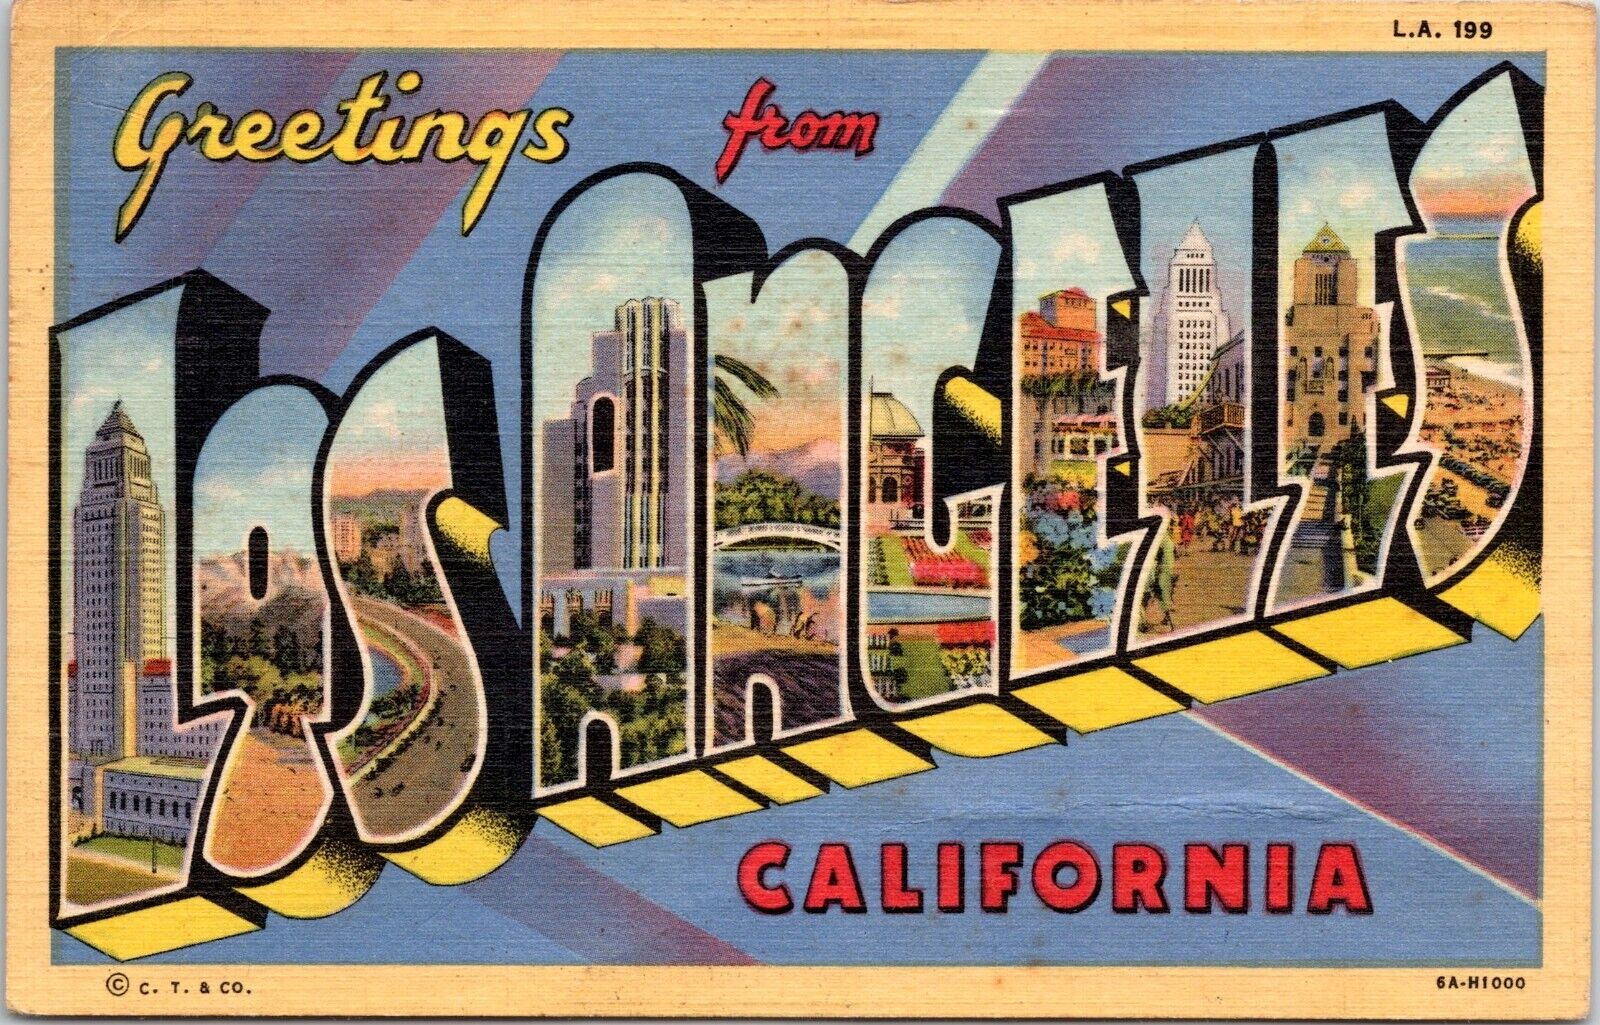 Large Letter Greetings from Los Angeles California - 1936 Linen Postcard